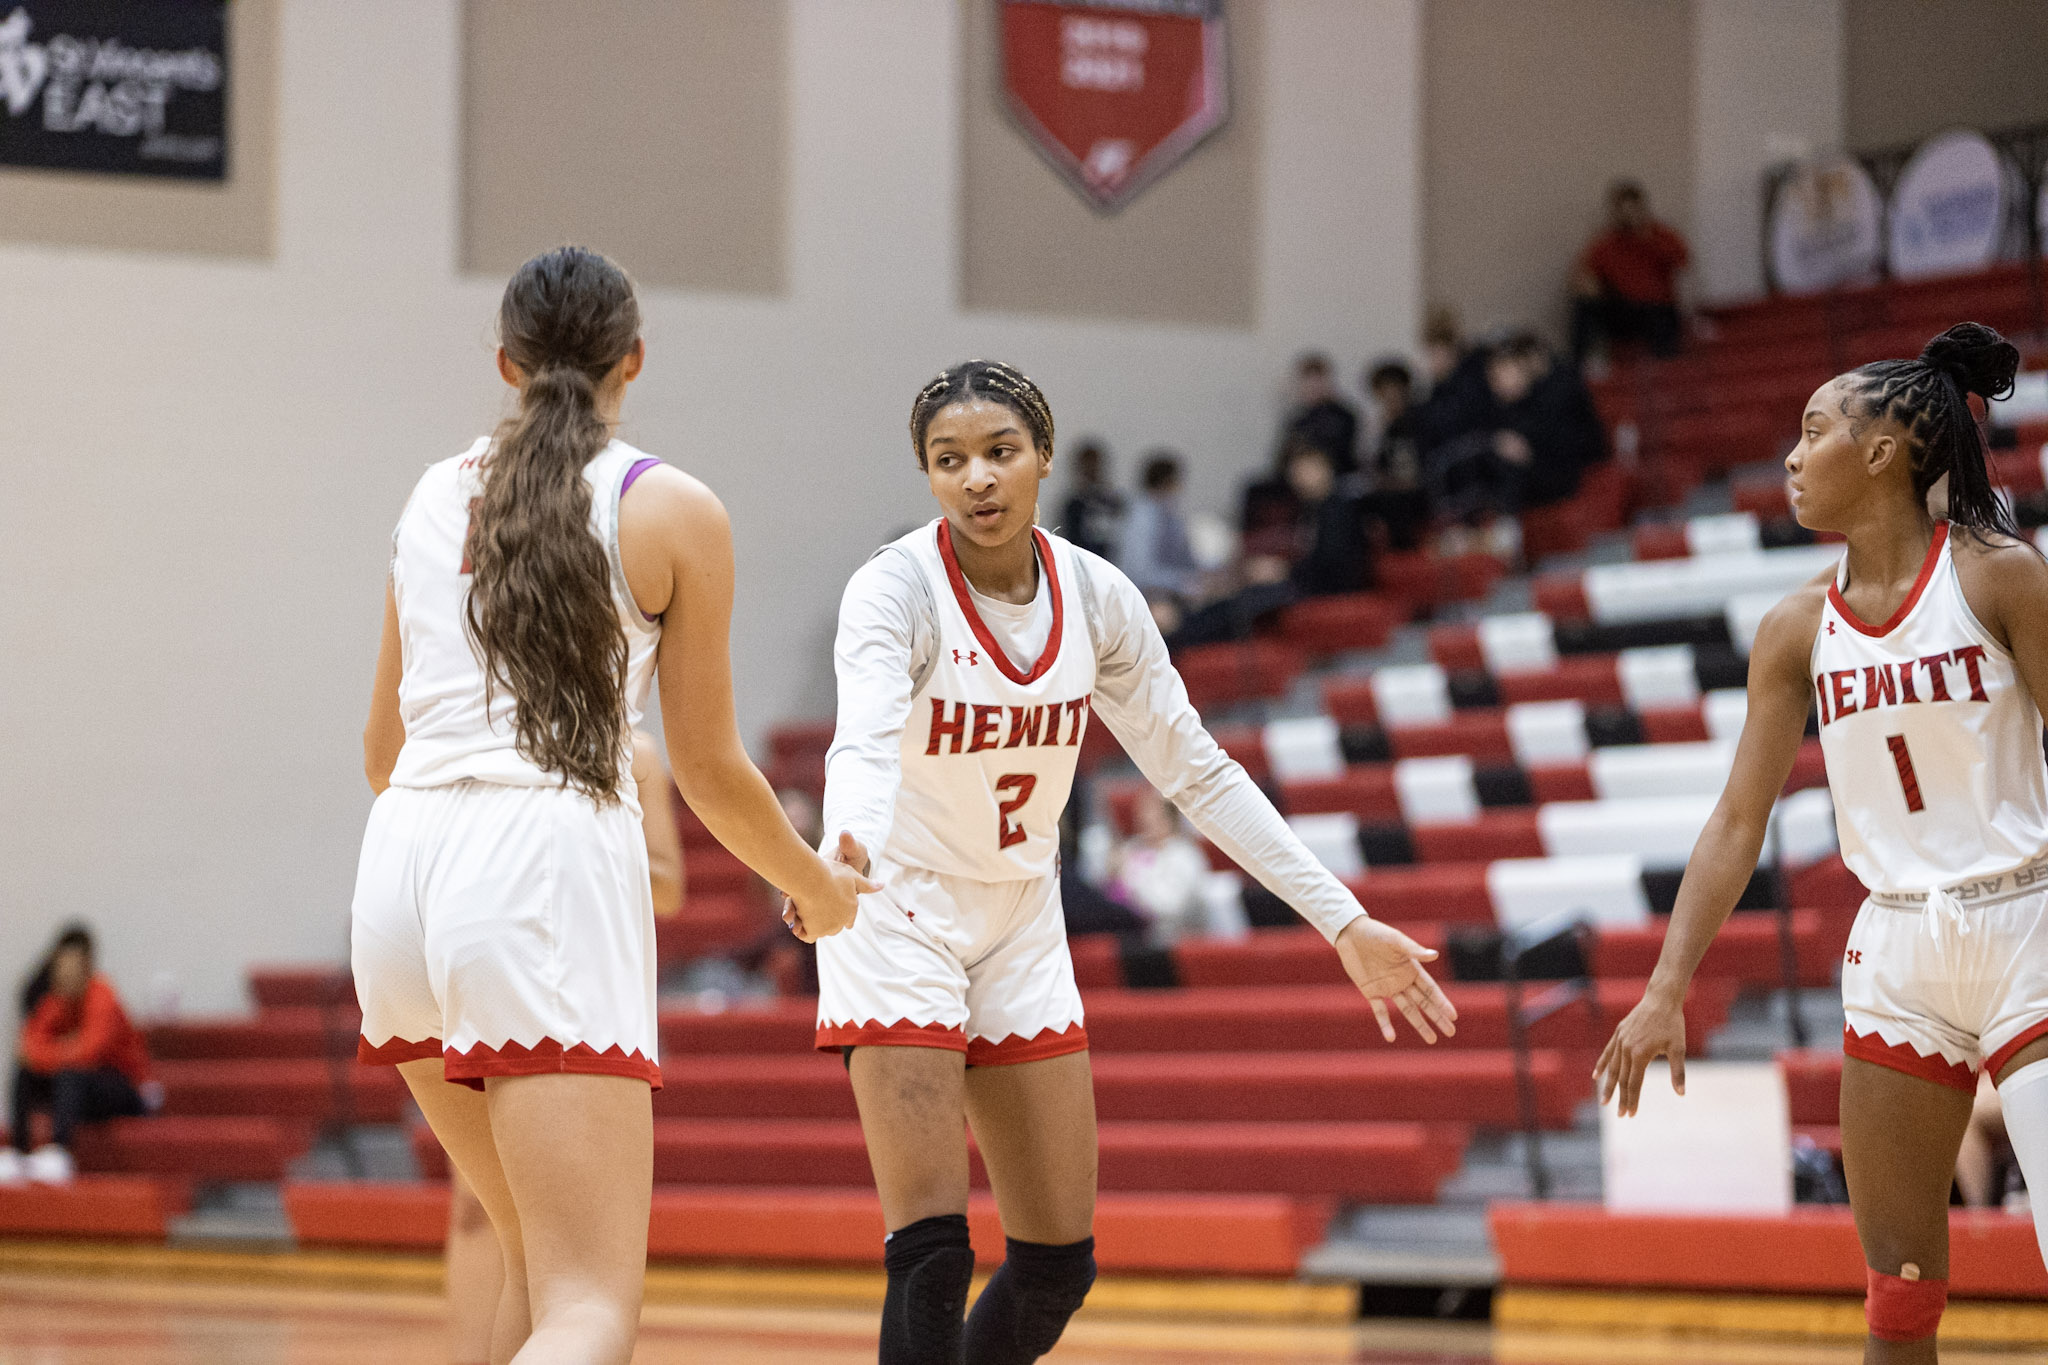 Lady Huskies make long road trip, get win over Central-Phenix City, 53-46